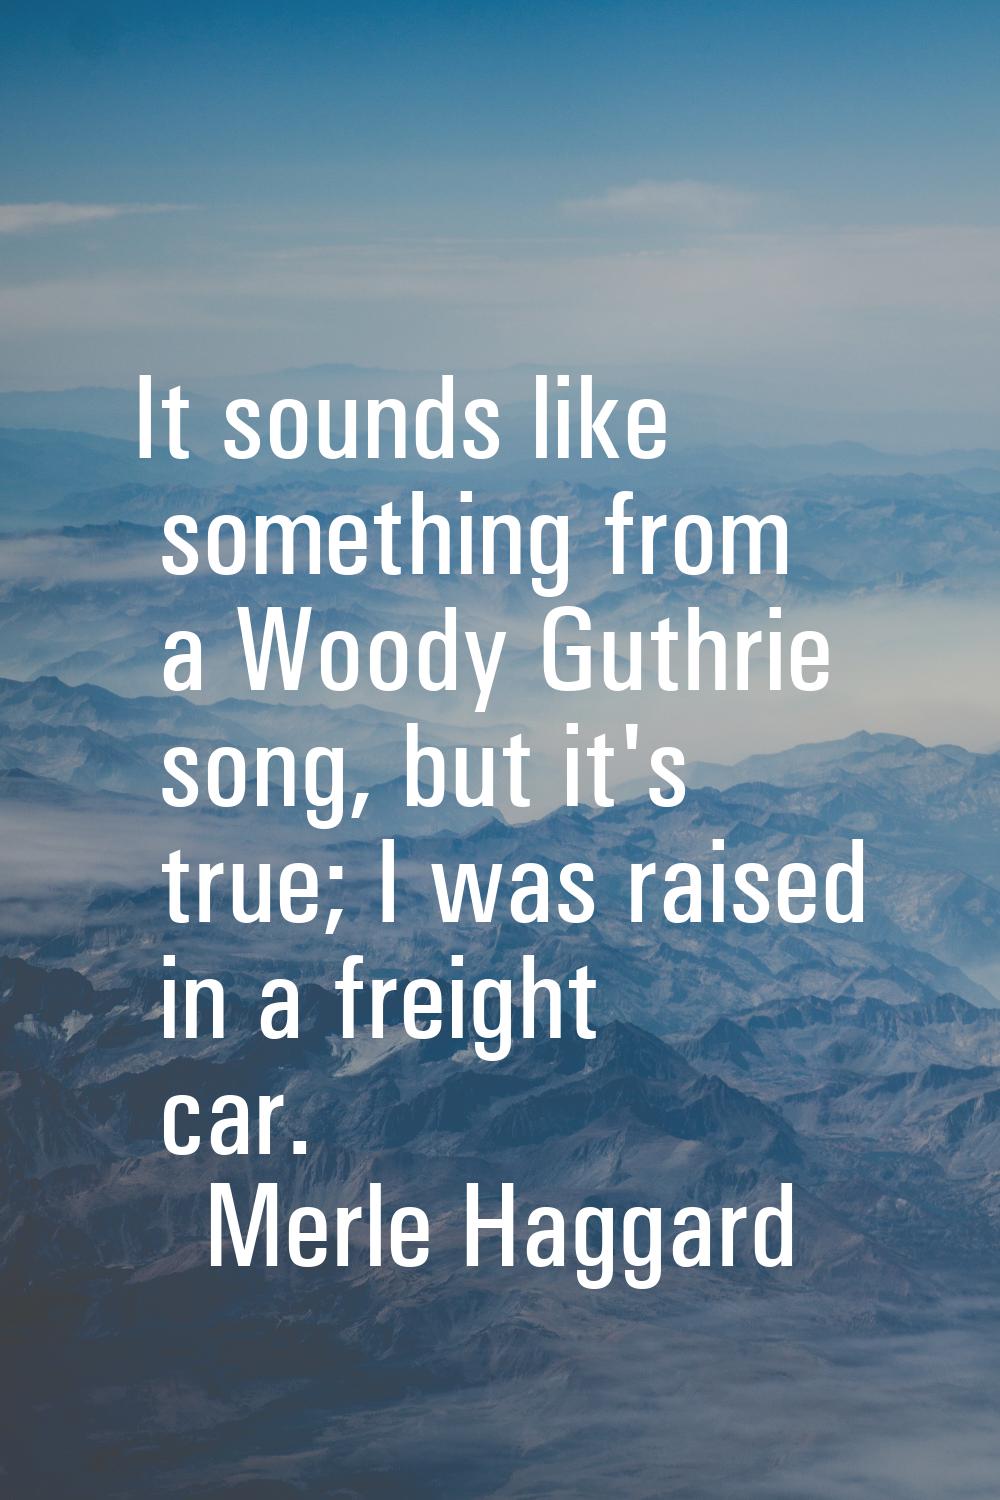 It sounds like something from a Woody Guthrie song, but it's true; I was raised in a freight car.